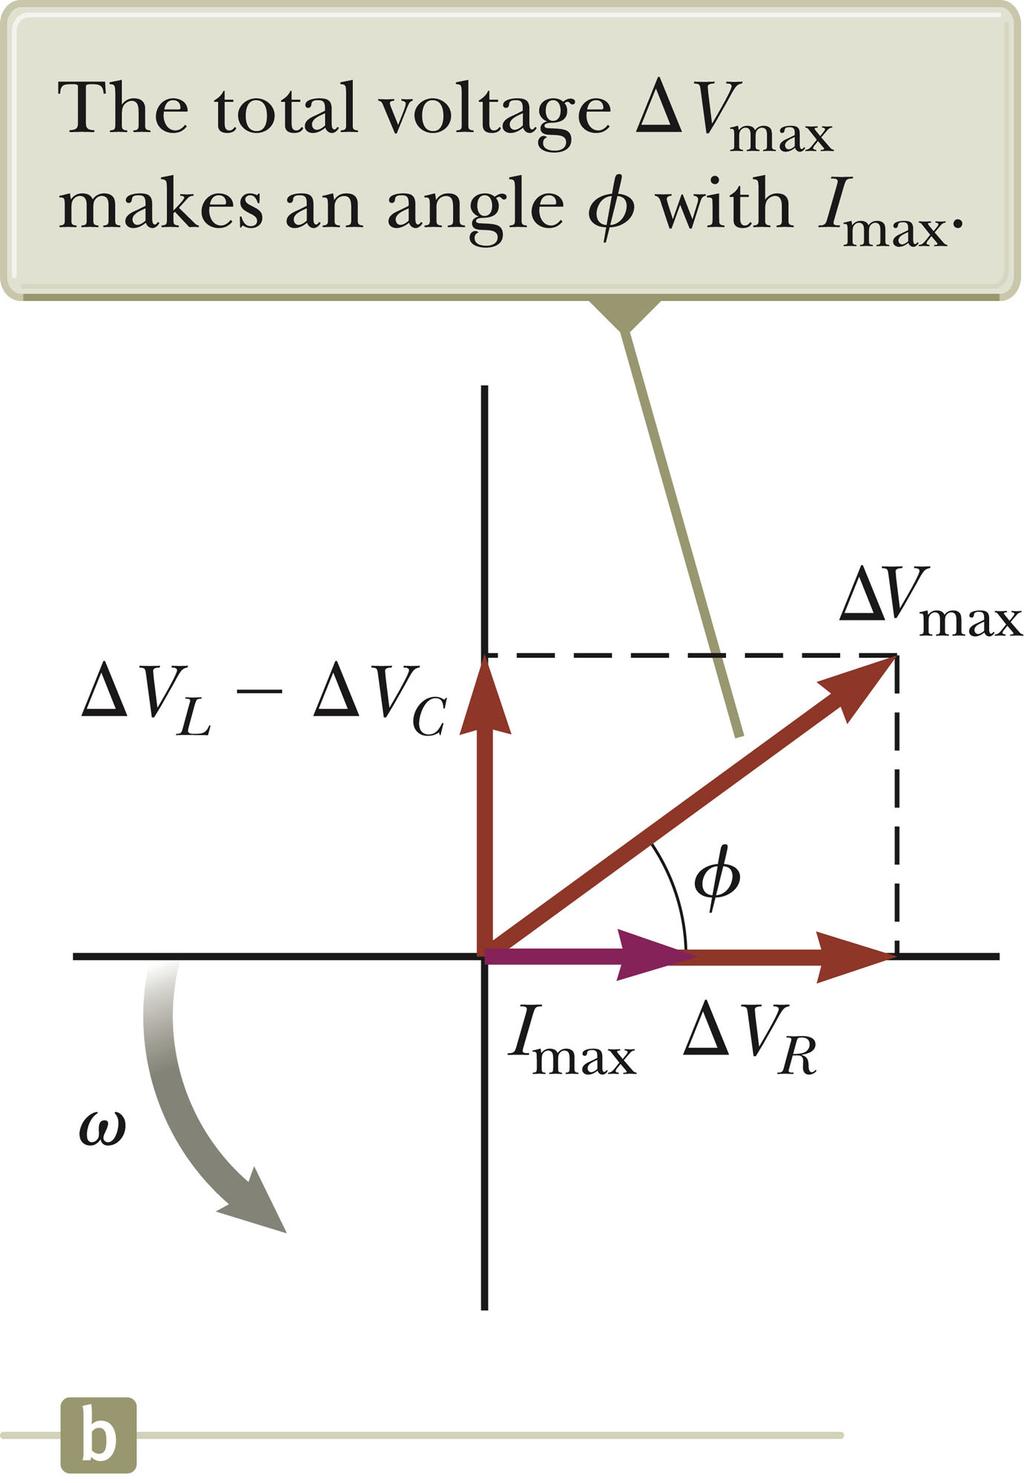 Here a single phasor Imax is used to represent the current in